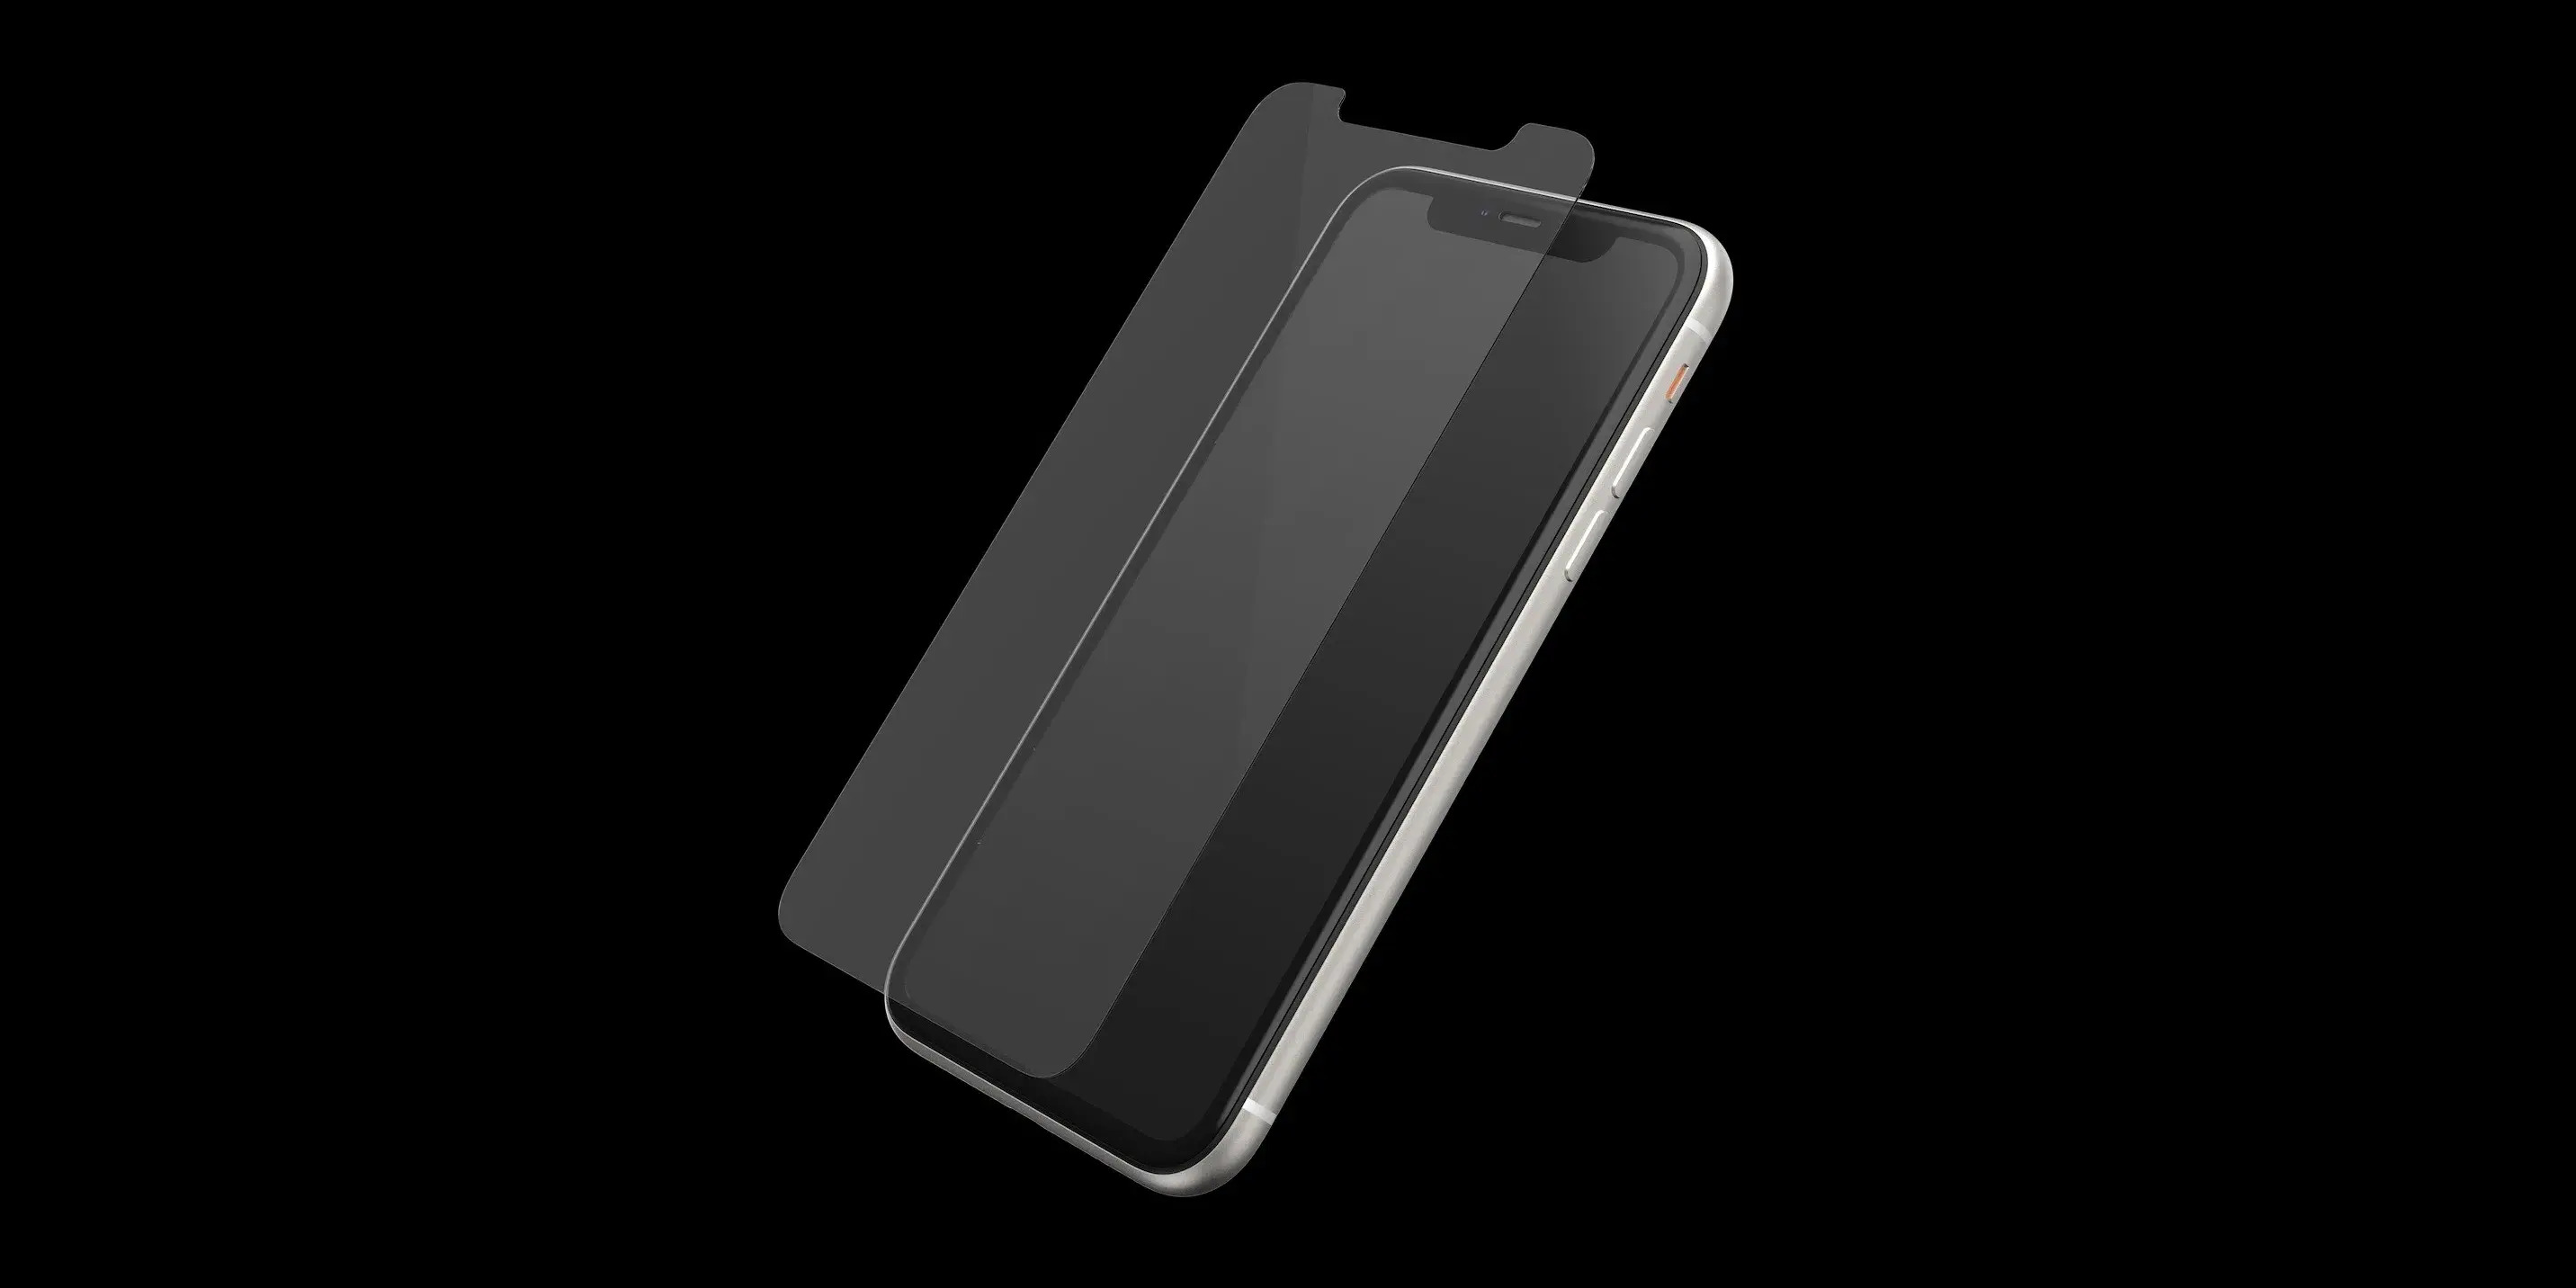 otterbox-screen-protector-clarifying-features-for-iphone-10